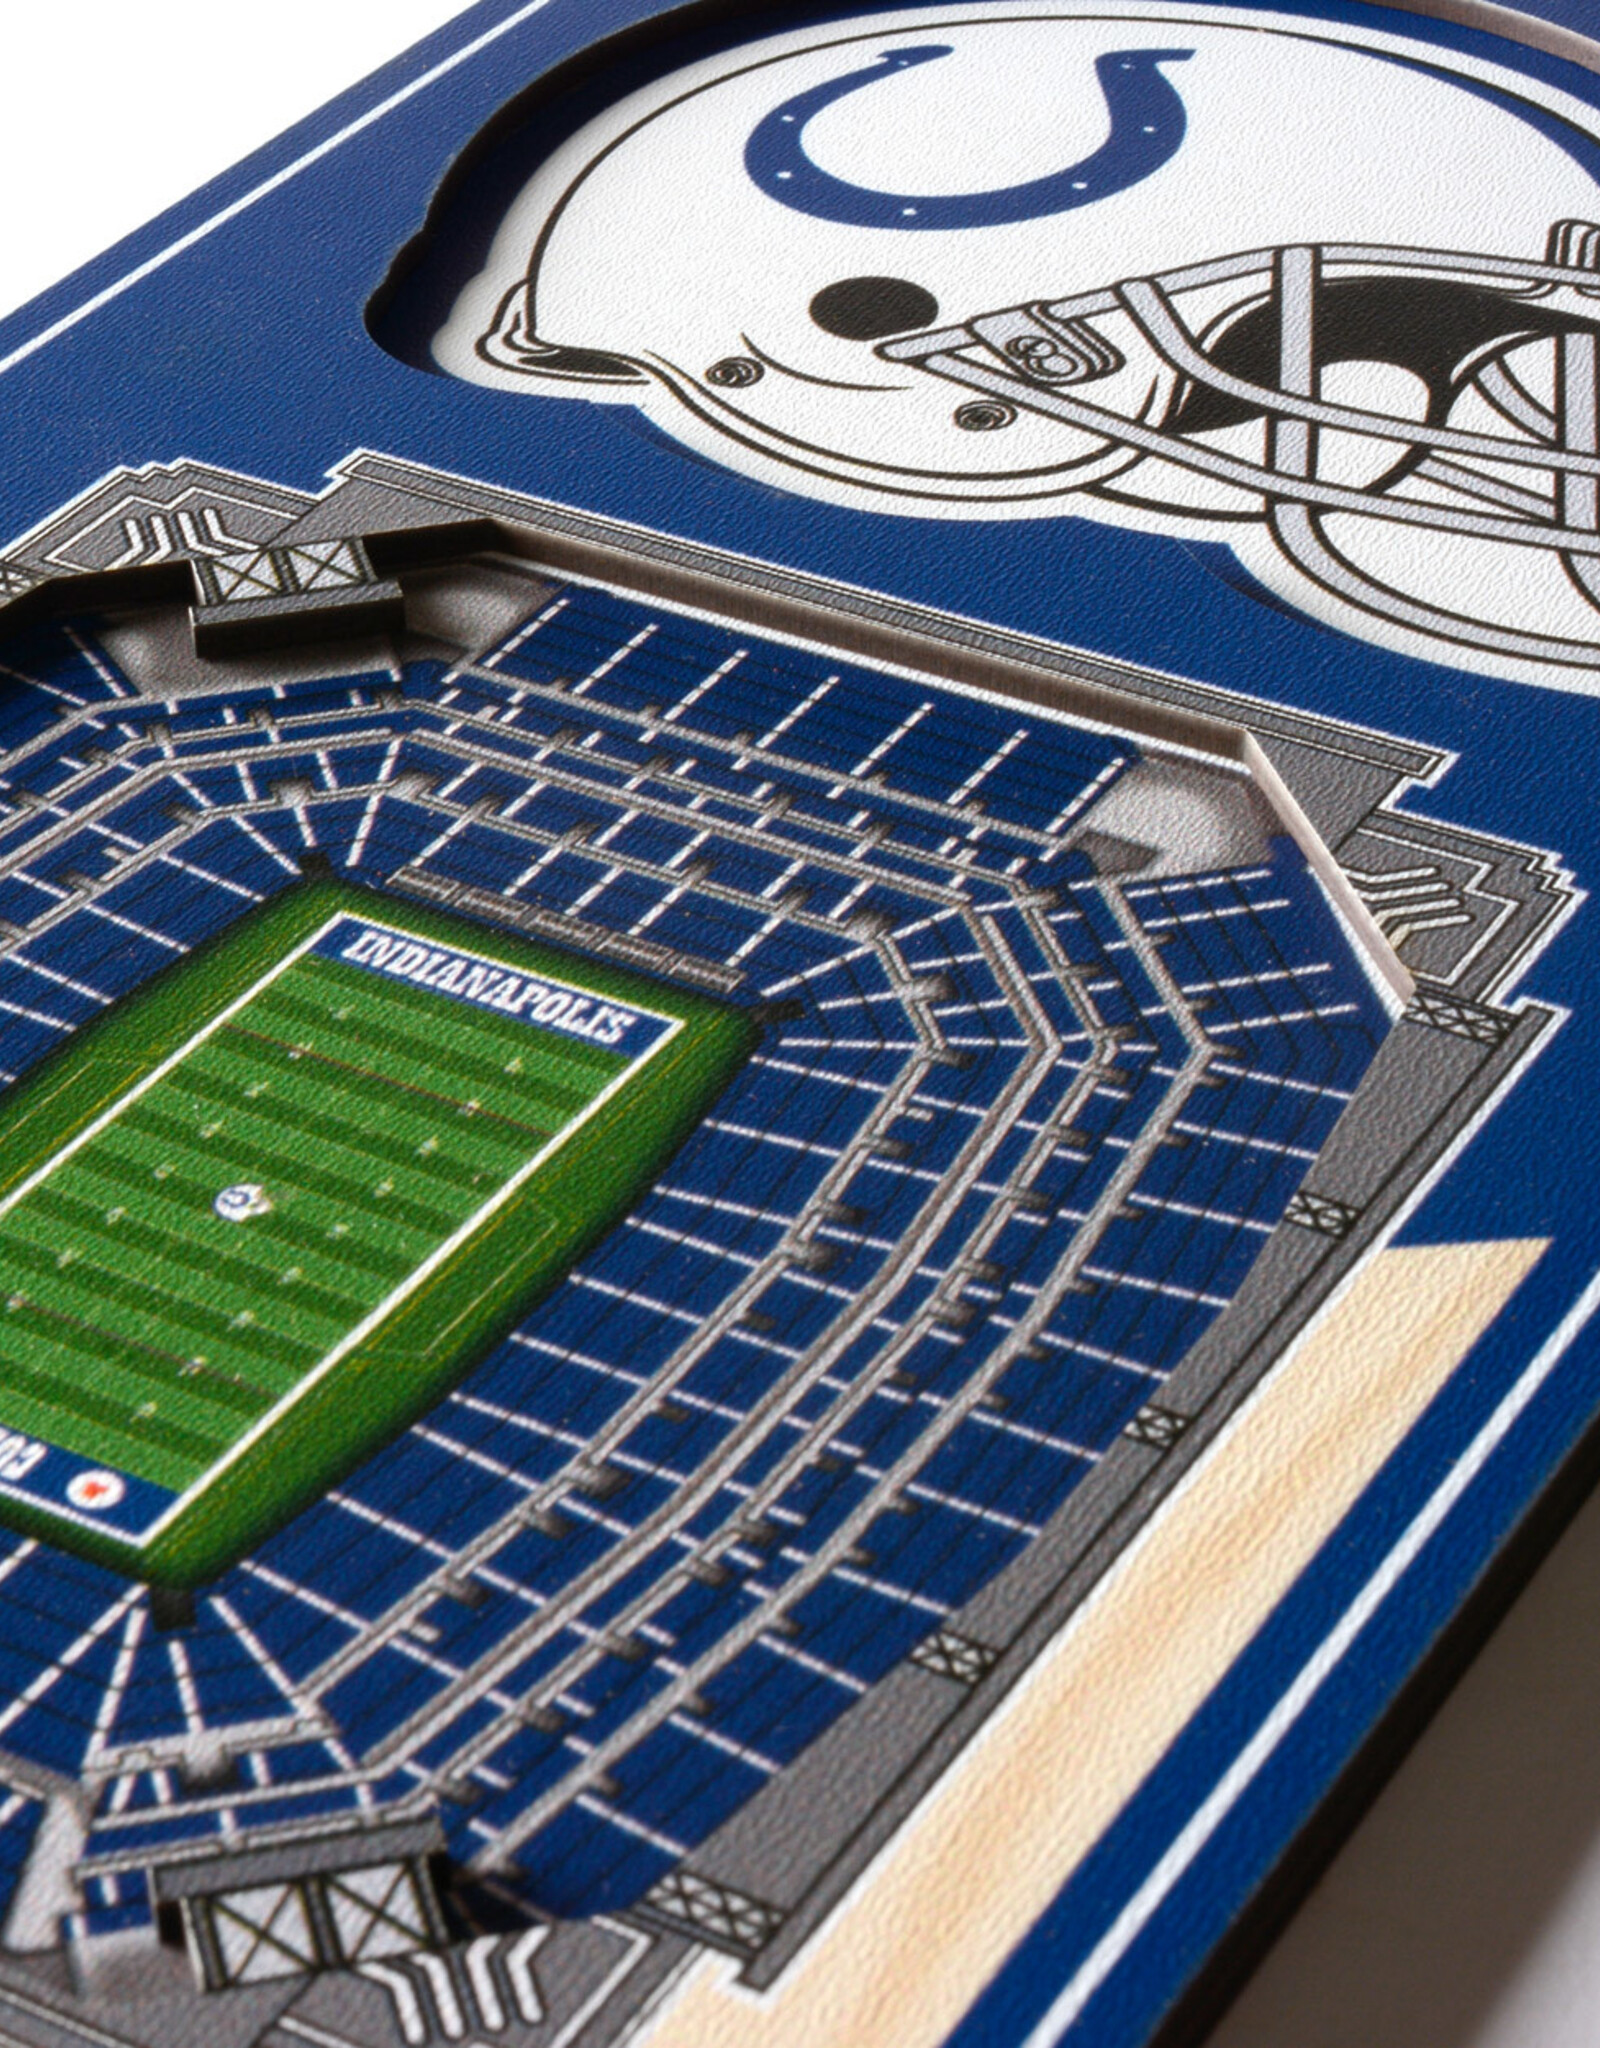 YOU THE FAN Indianapolis Colts 3D StadiumView 6x19 Banner